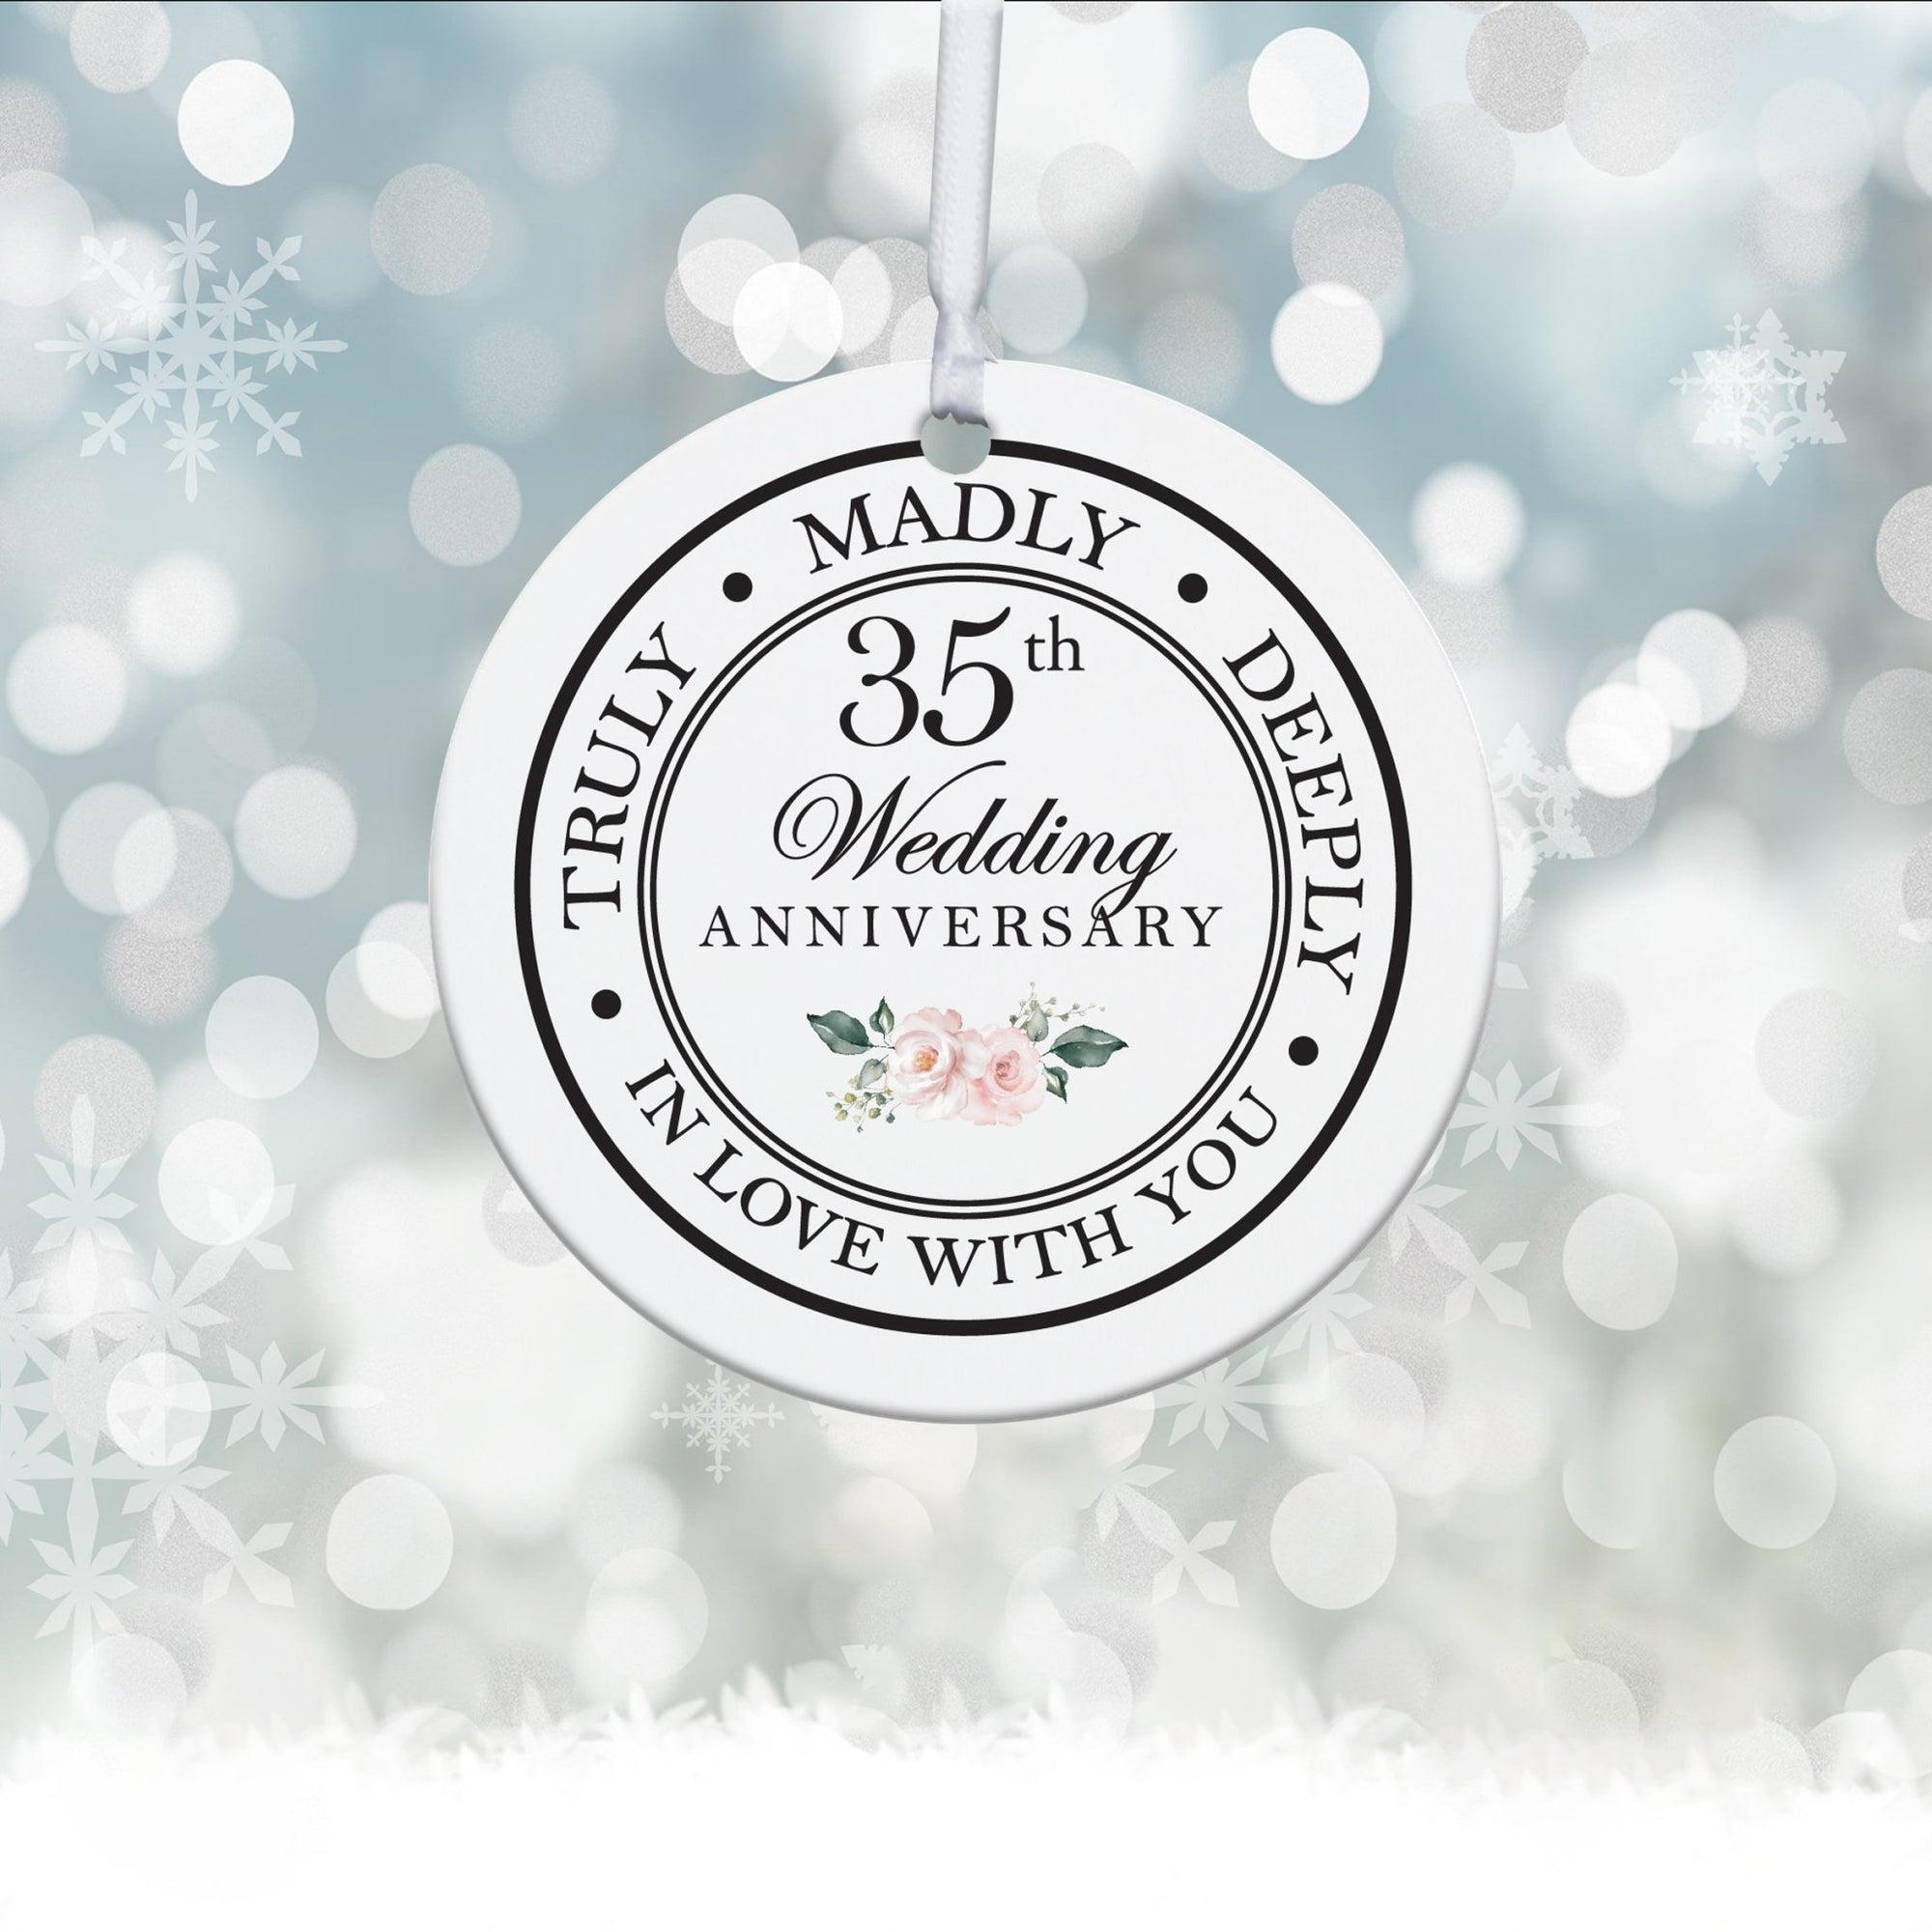 35th Wedding Anniversary White Ornament With Inspirational Message Gift Ideas - Truly, Madly, Deeply In Love With You - LifeSong Milestones